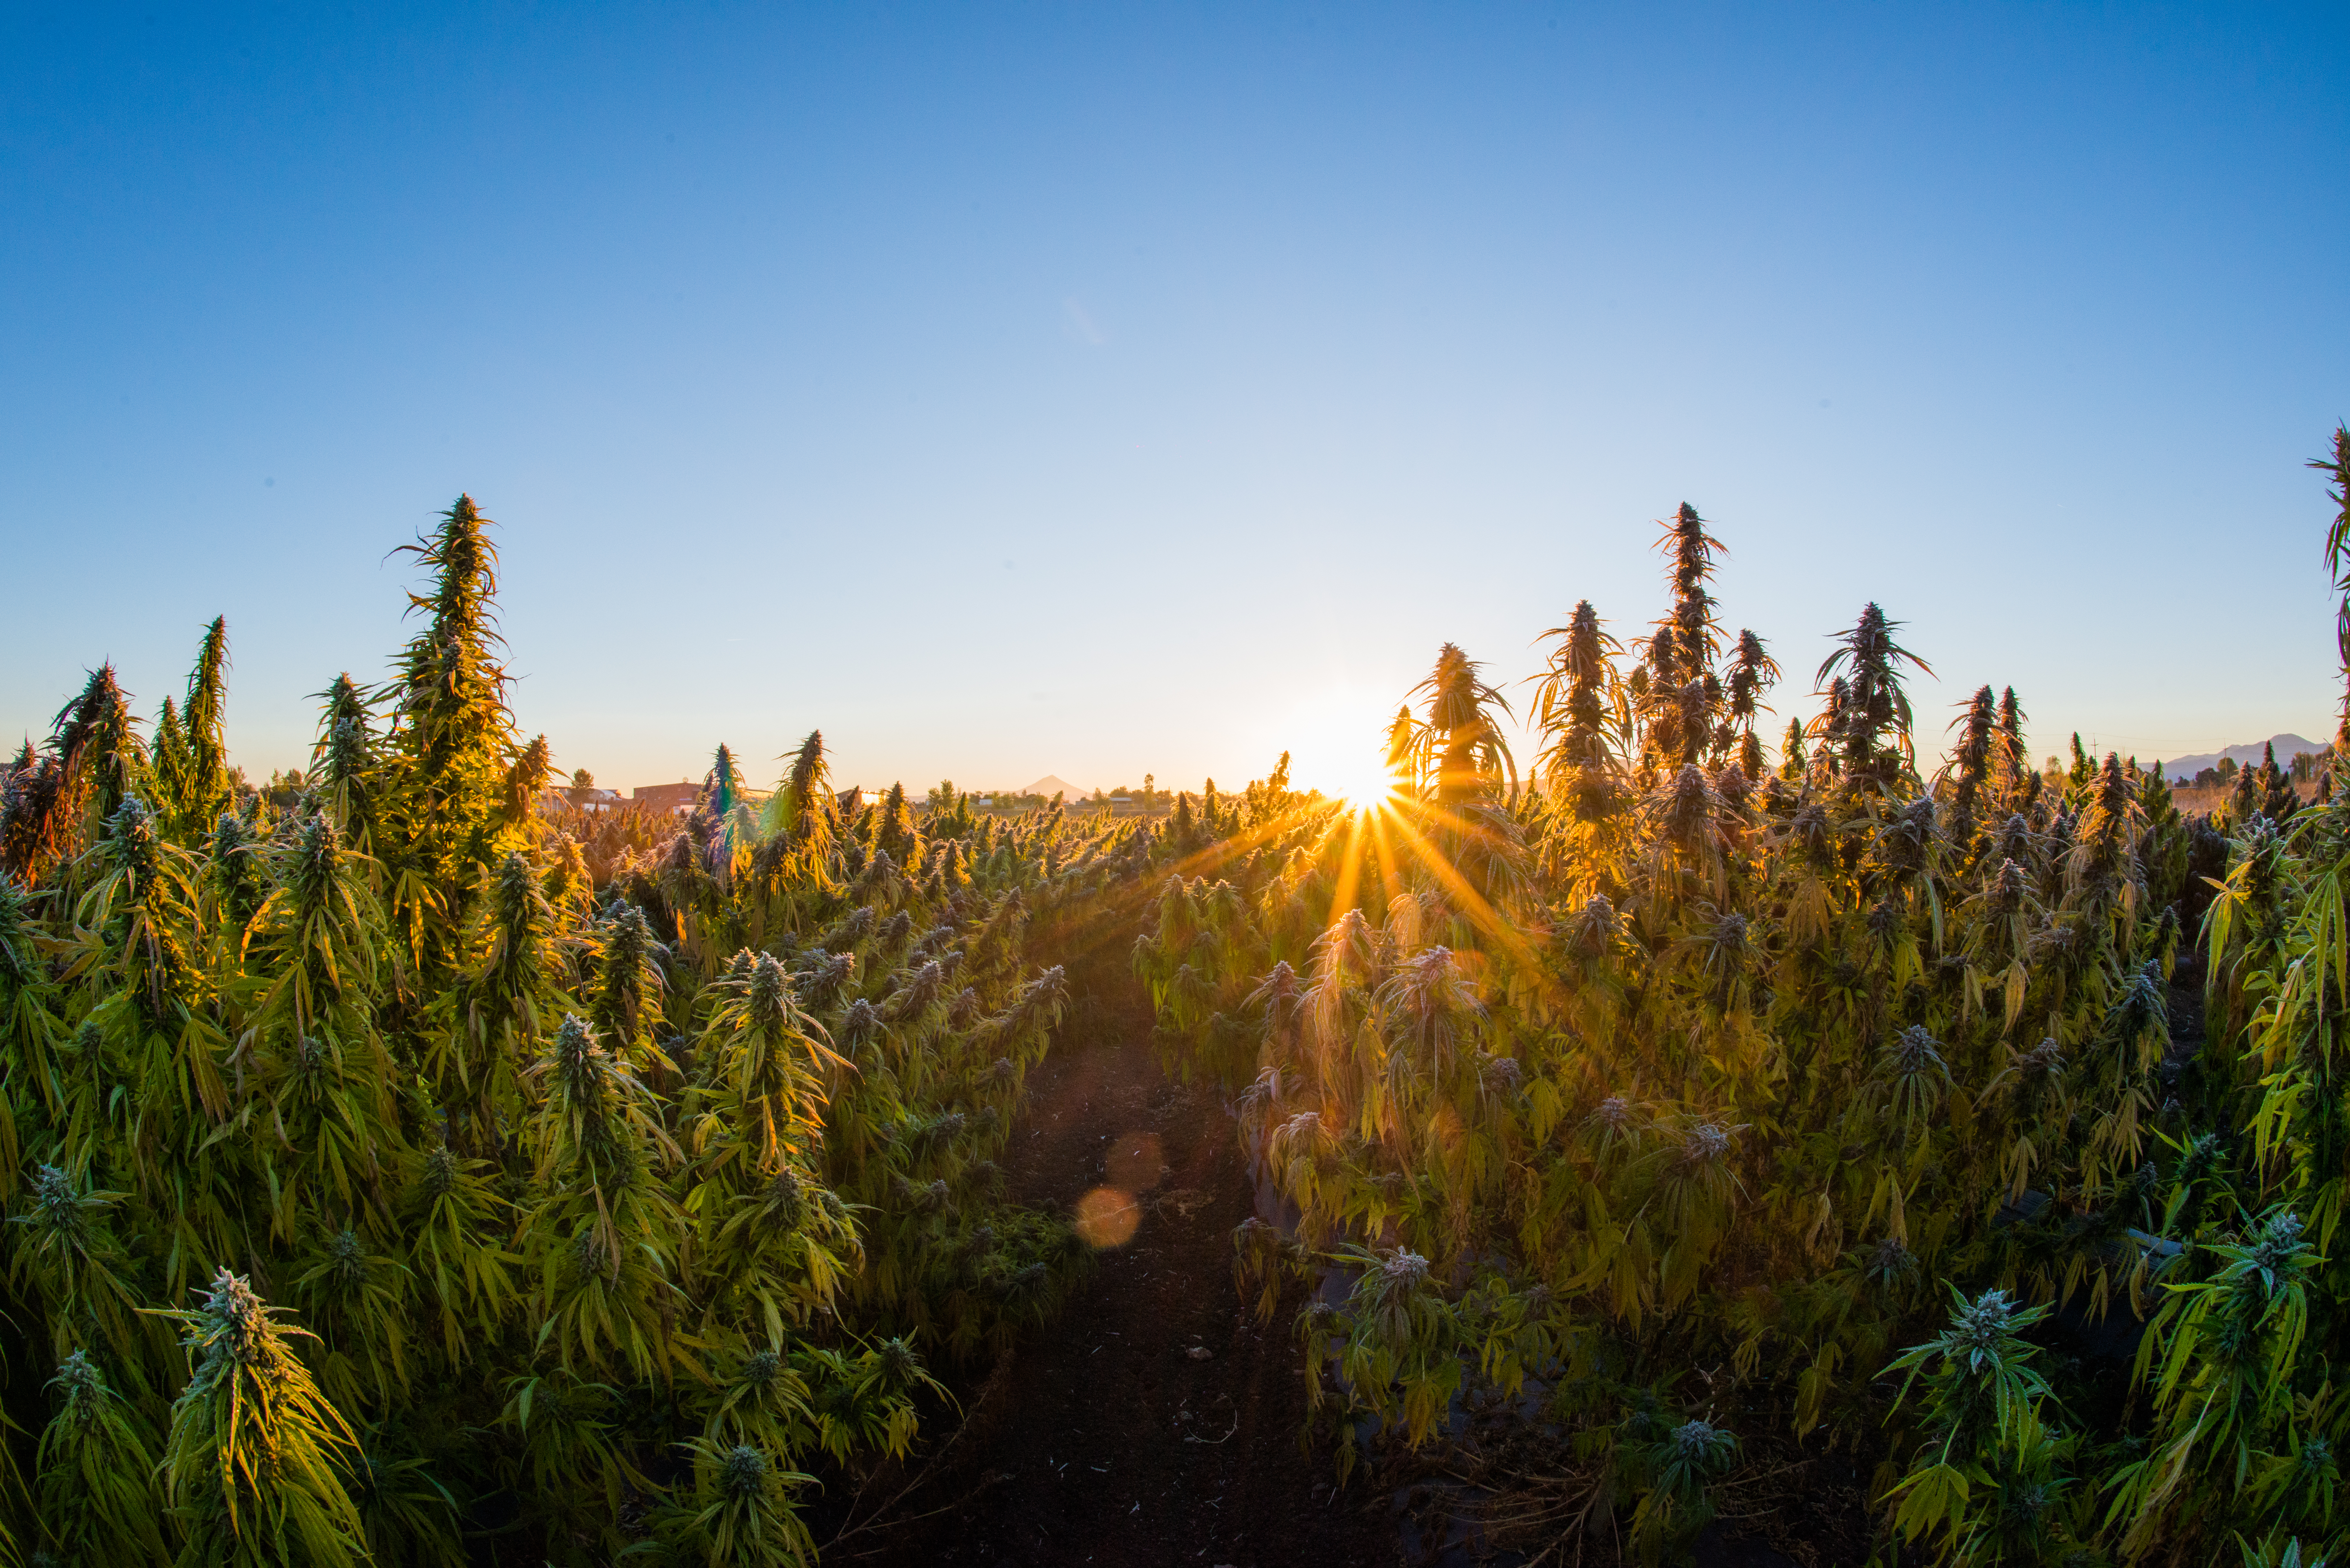 Some Of The Highest Quality Hemp On Earth Is Being Grown In Southern Oregon By Hemptown USA